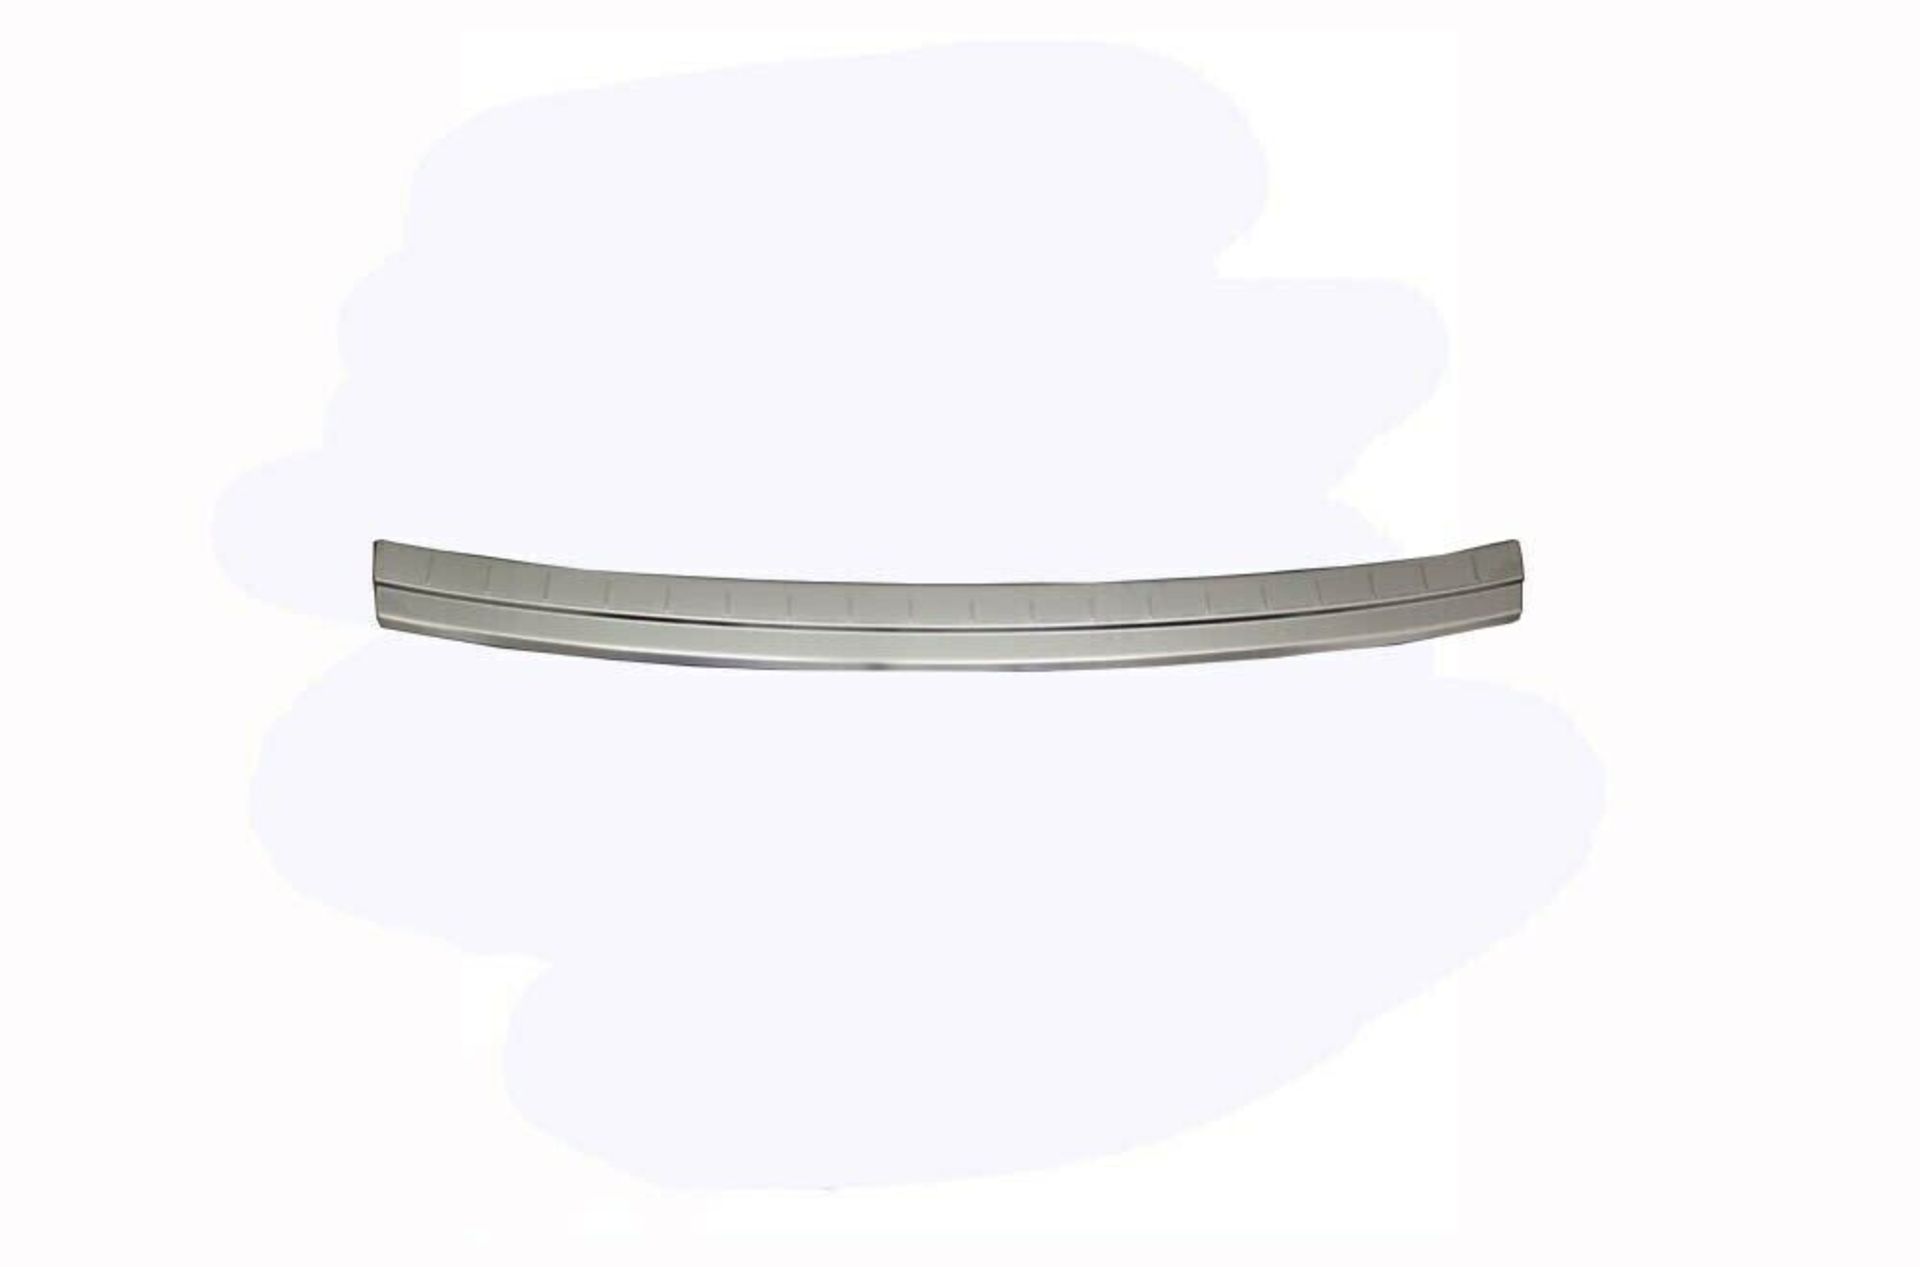 100 X LOTS AUDI Q7 2010-2015 STAINLESS STEEL REAR BUMPER PROTECTOR, SCRATCH GUARD - Image 2 of 5